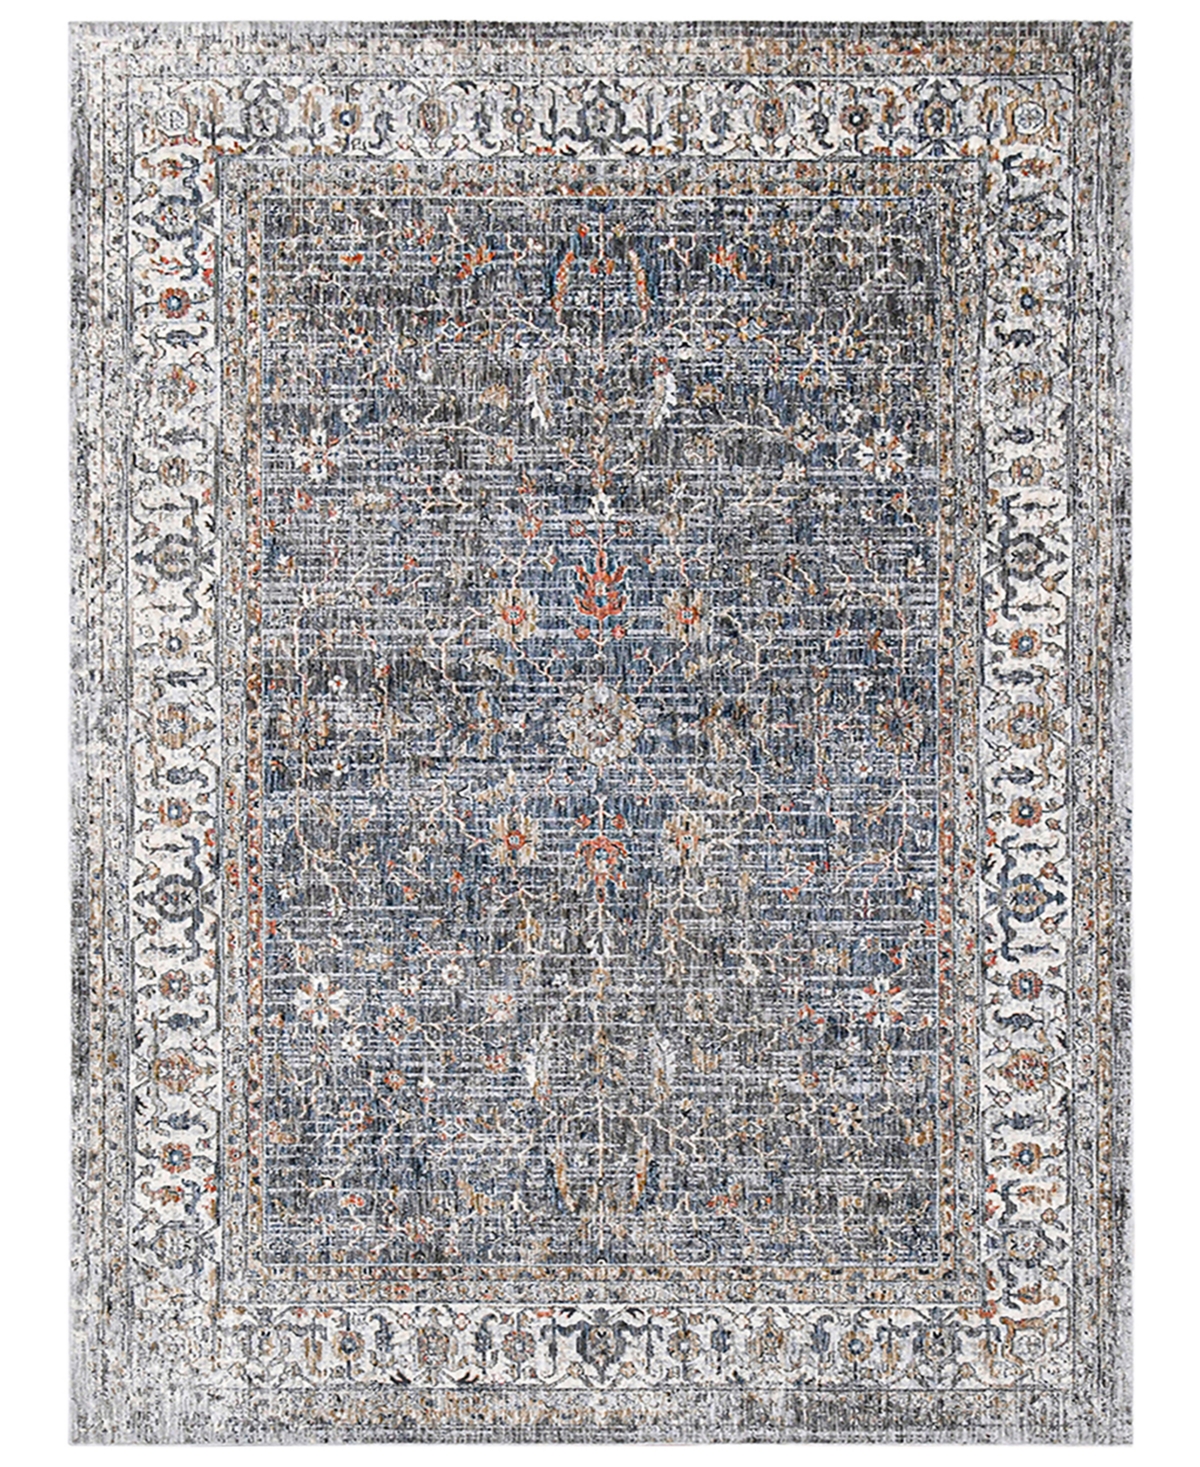 AMER RUGS VERMONT GLIDEL 5'3" X 7'6" AREA RUG